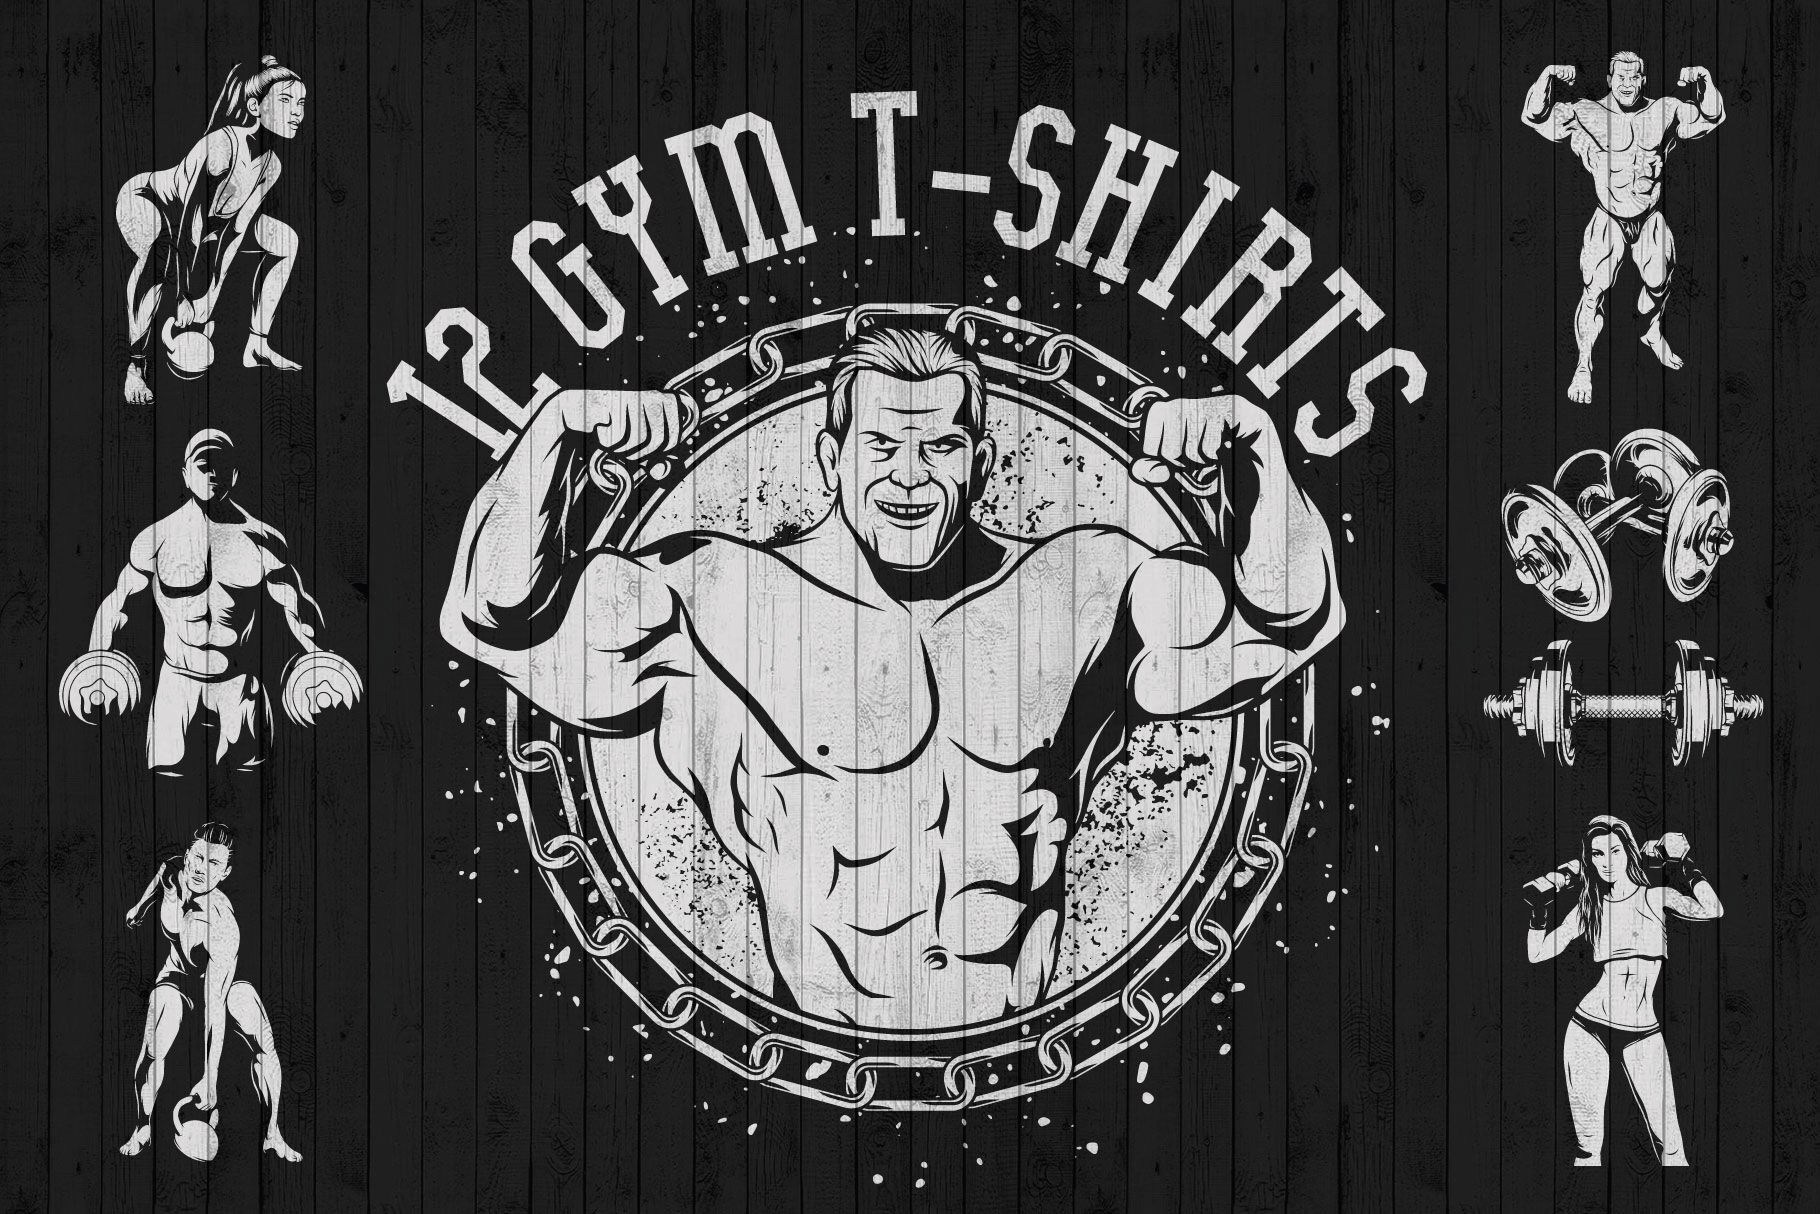 Gym T Shirt Design Vintage Fitness Shirt Graphic by Creative